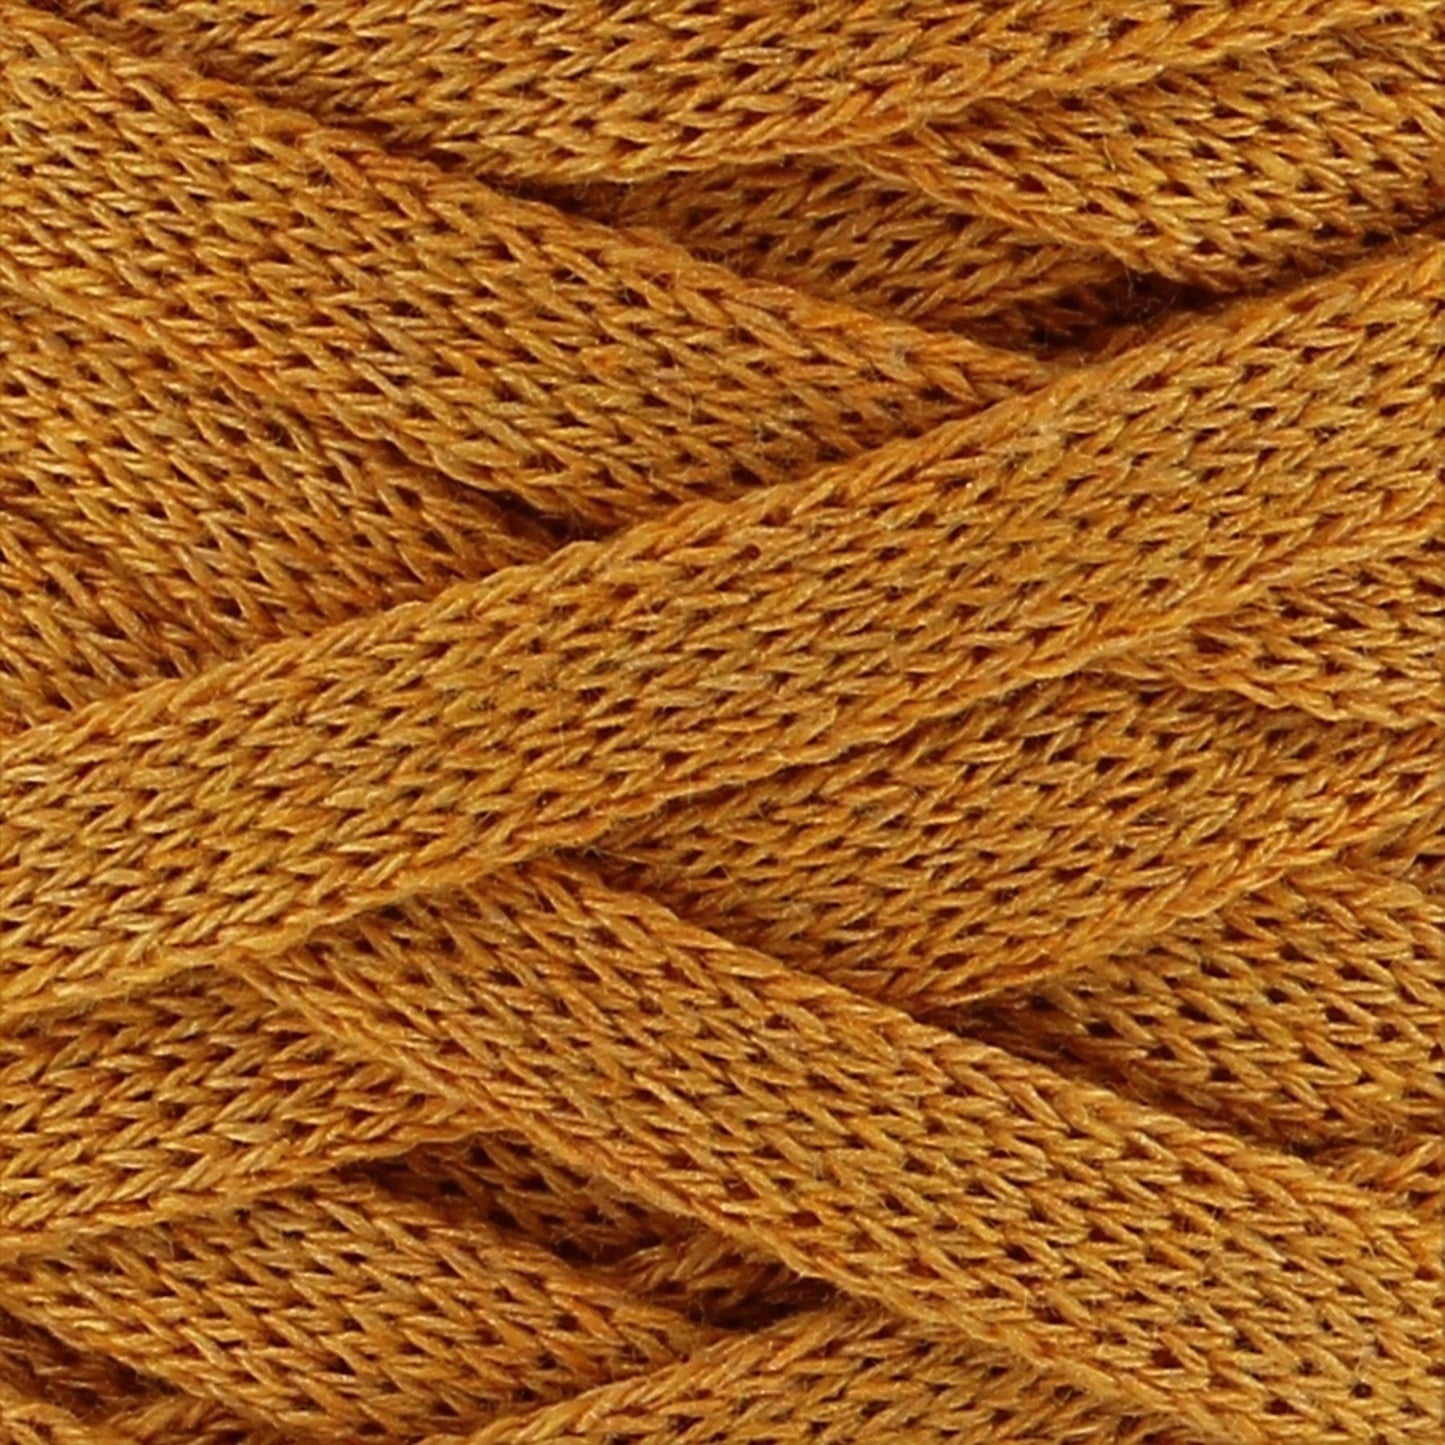 Hoooked RibbonXL Harvest Ocre Cotton Yarn - 120M 250g